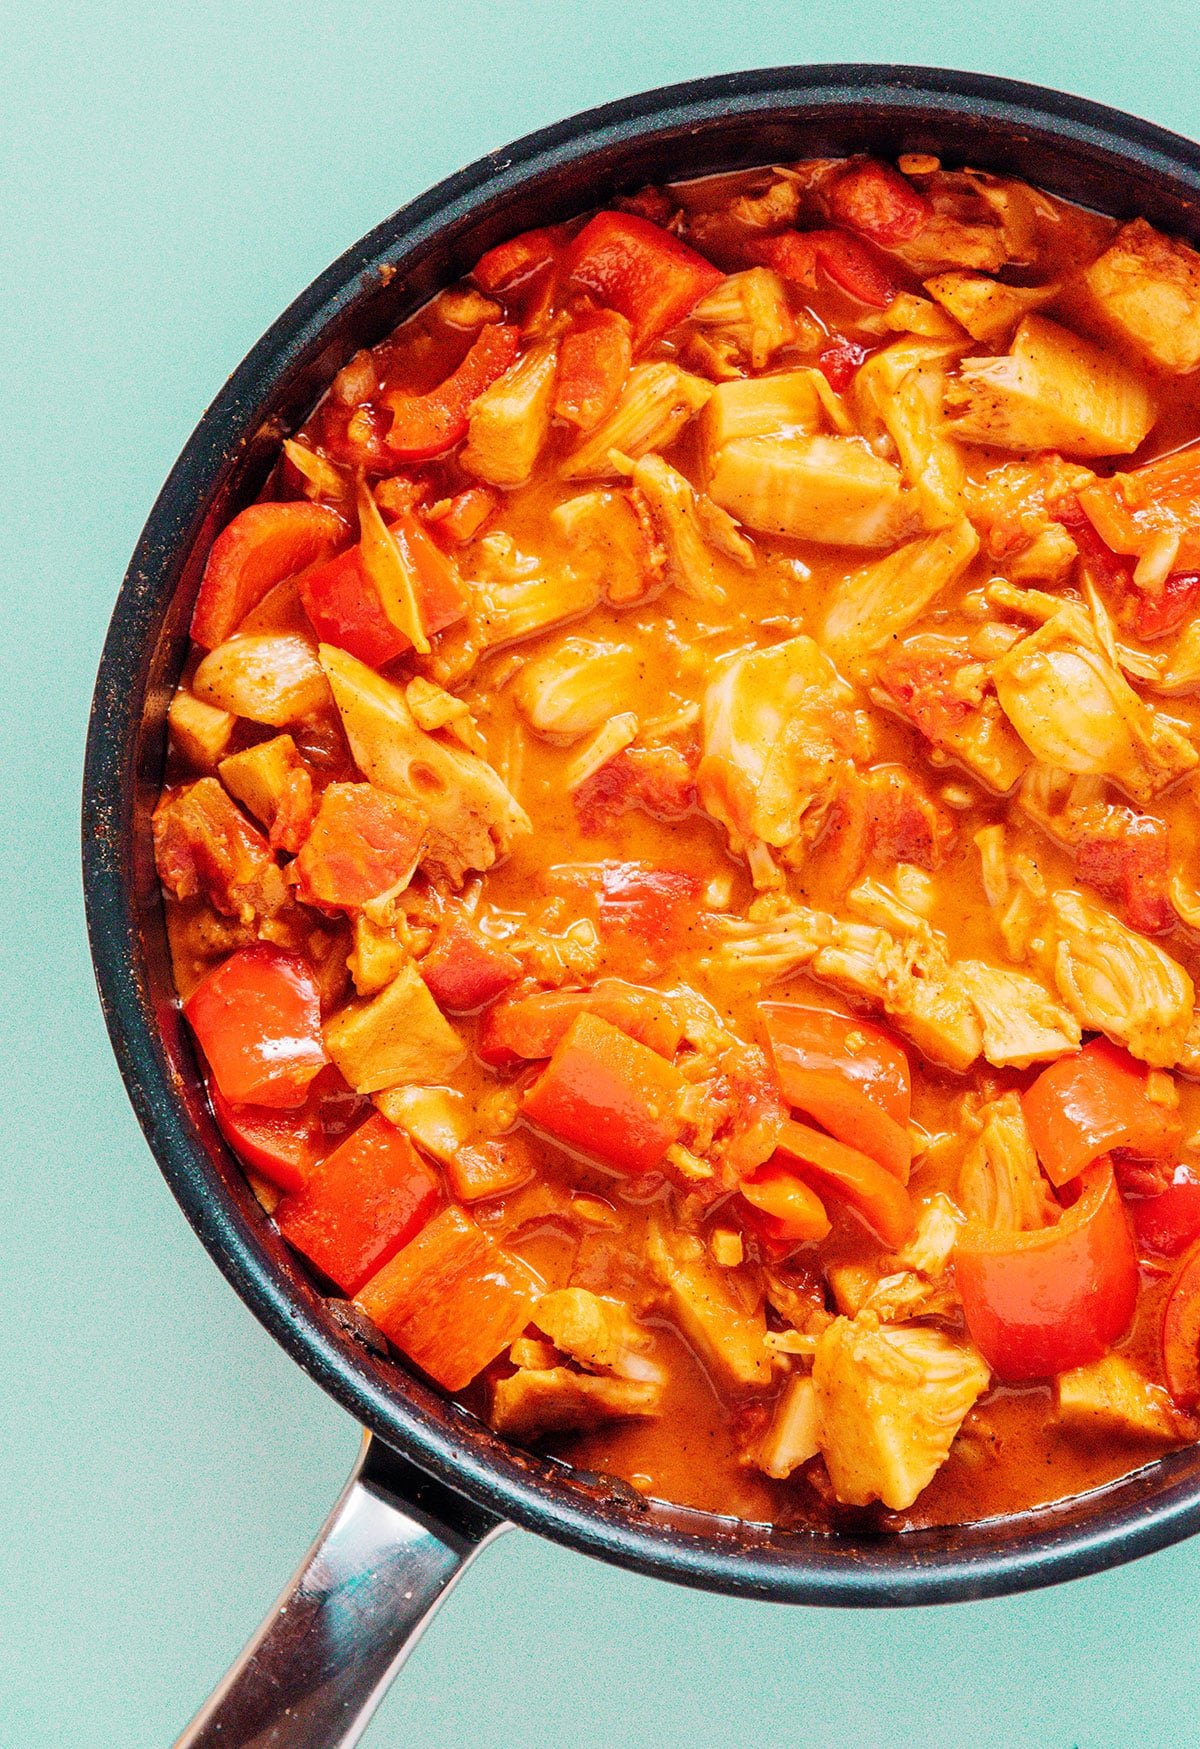 Jackfruit curry in a pan after cooking that is bright orange in color.